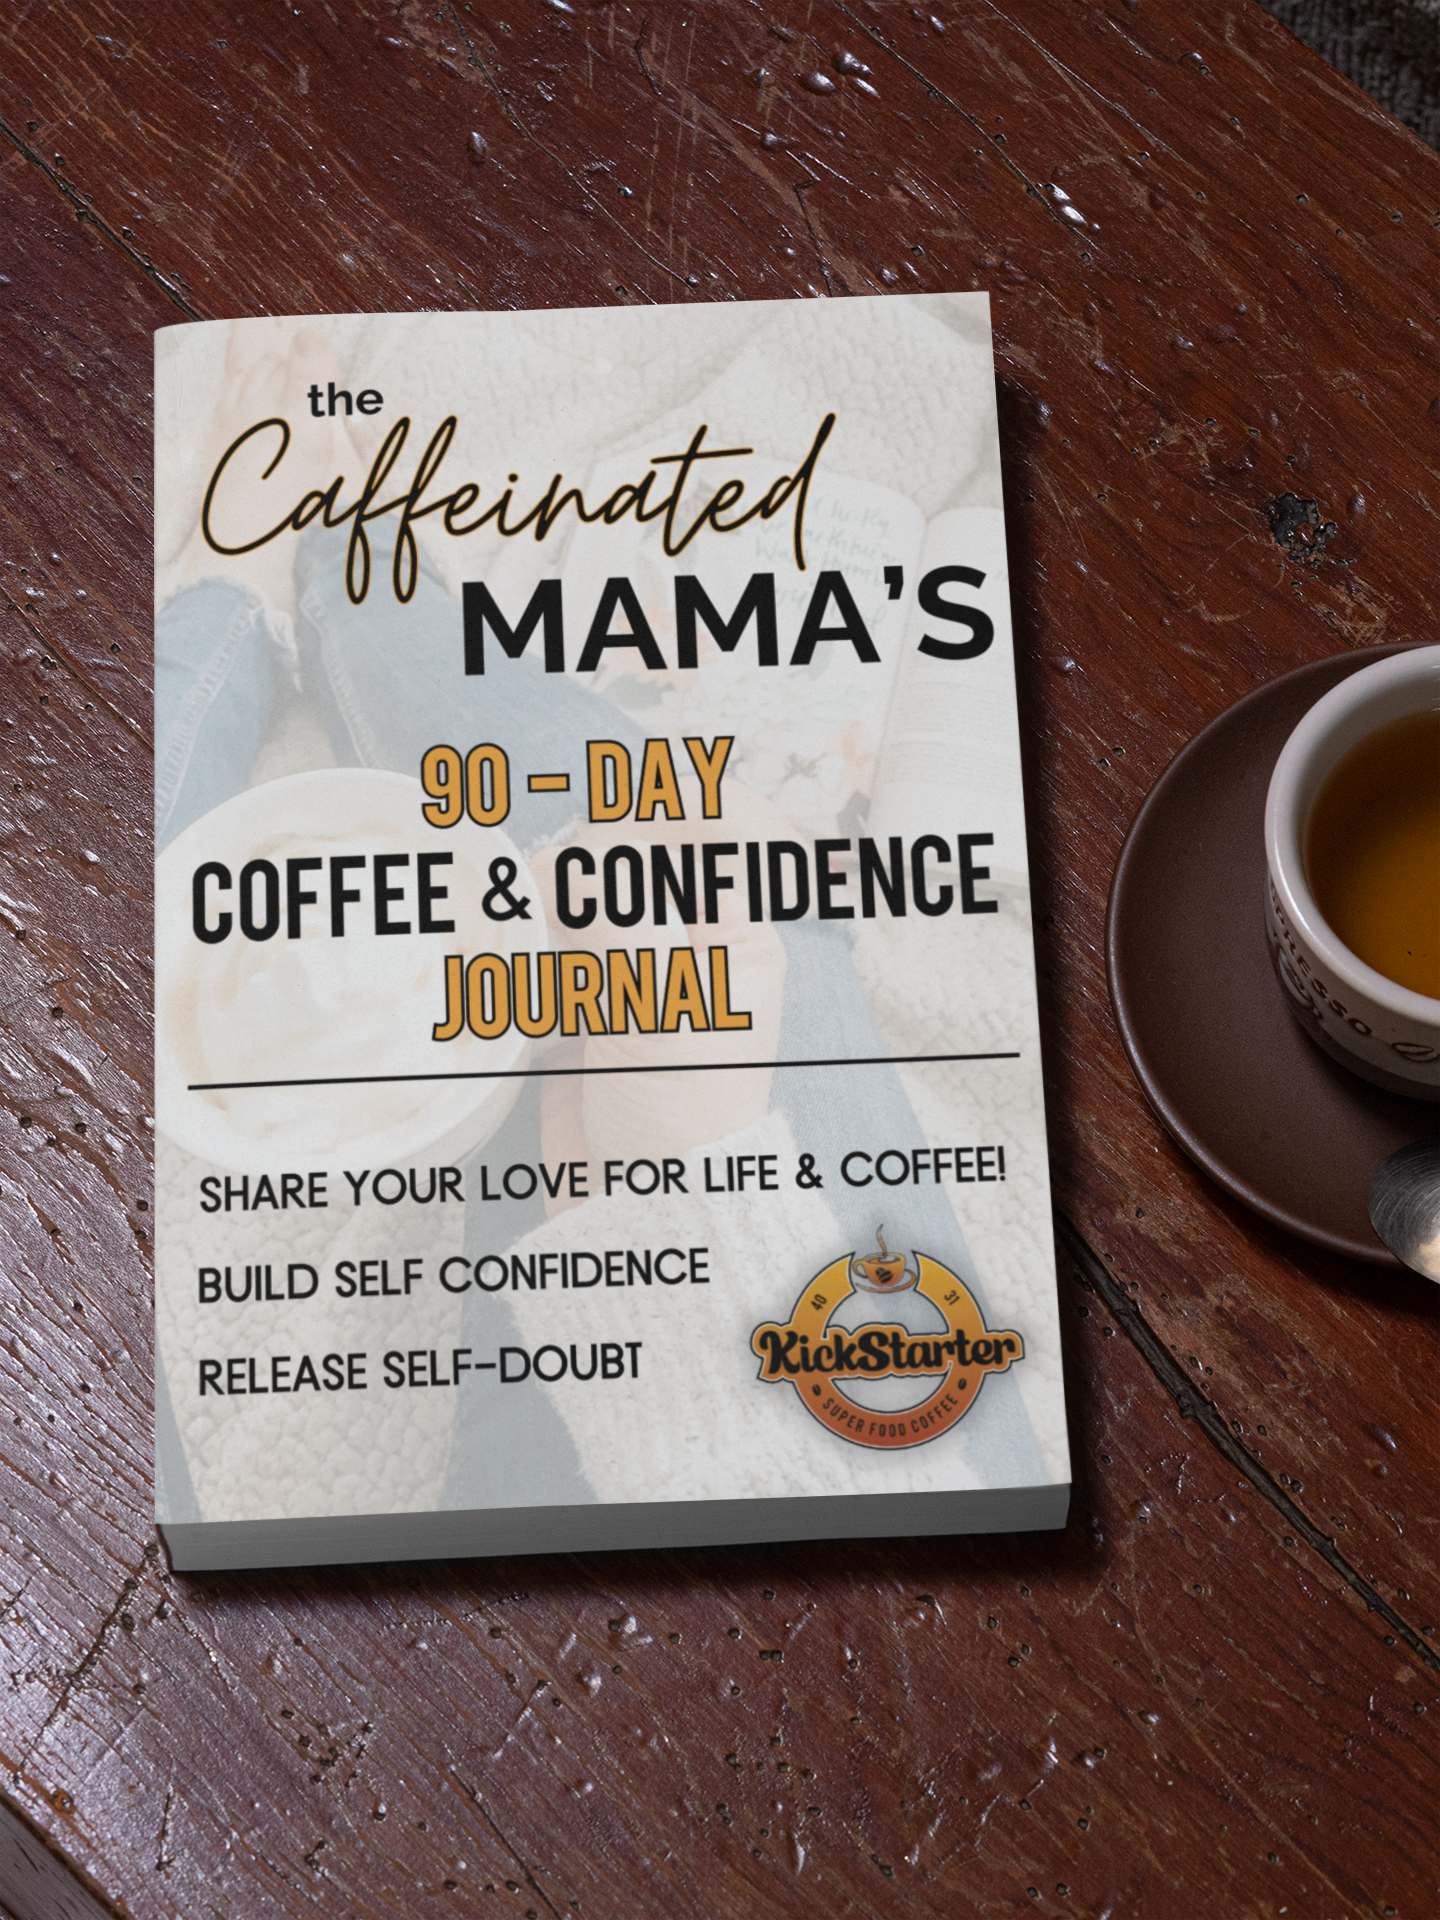 the Caffeinated Mama's 90-Day Coffee & Confidence Journal